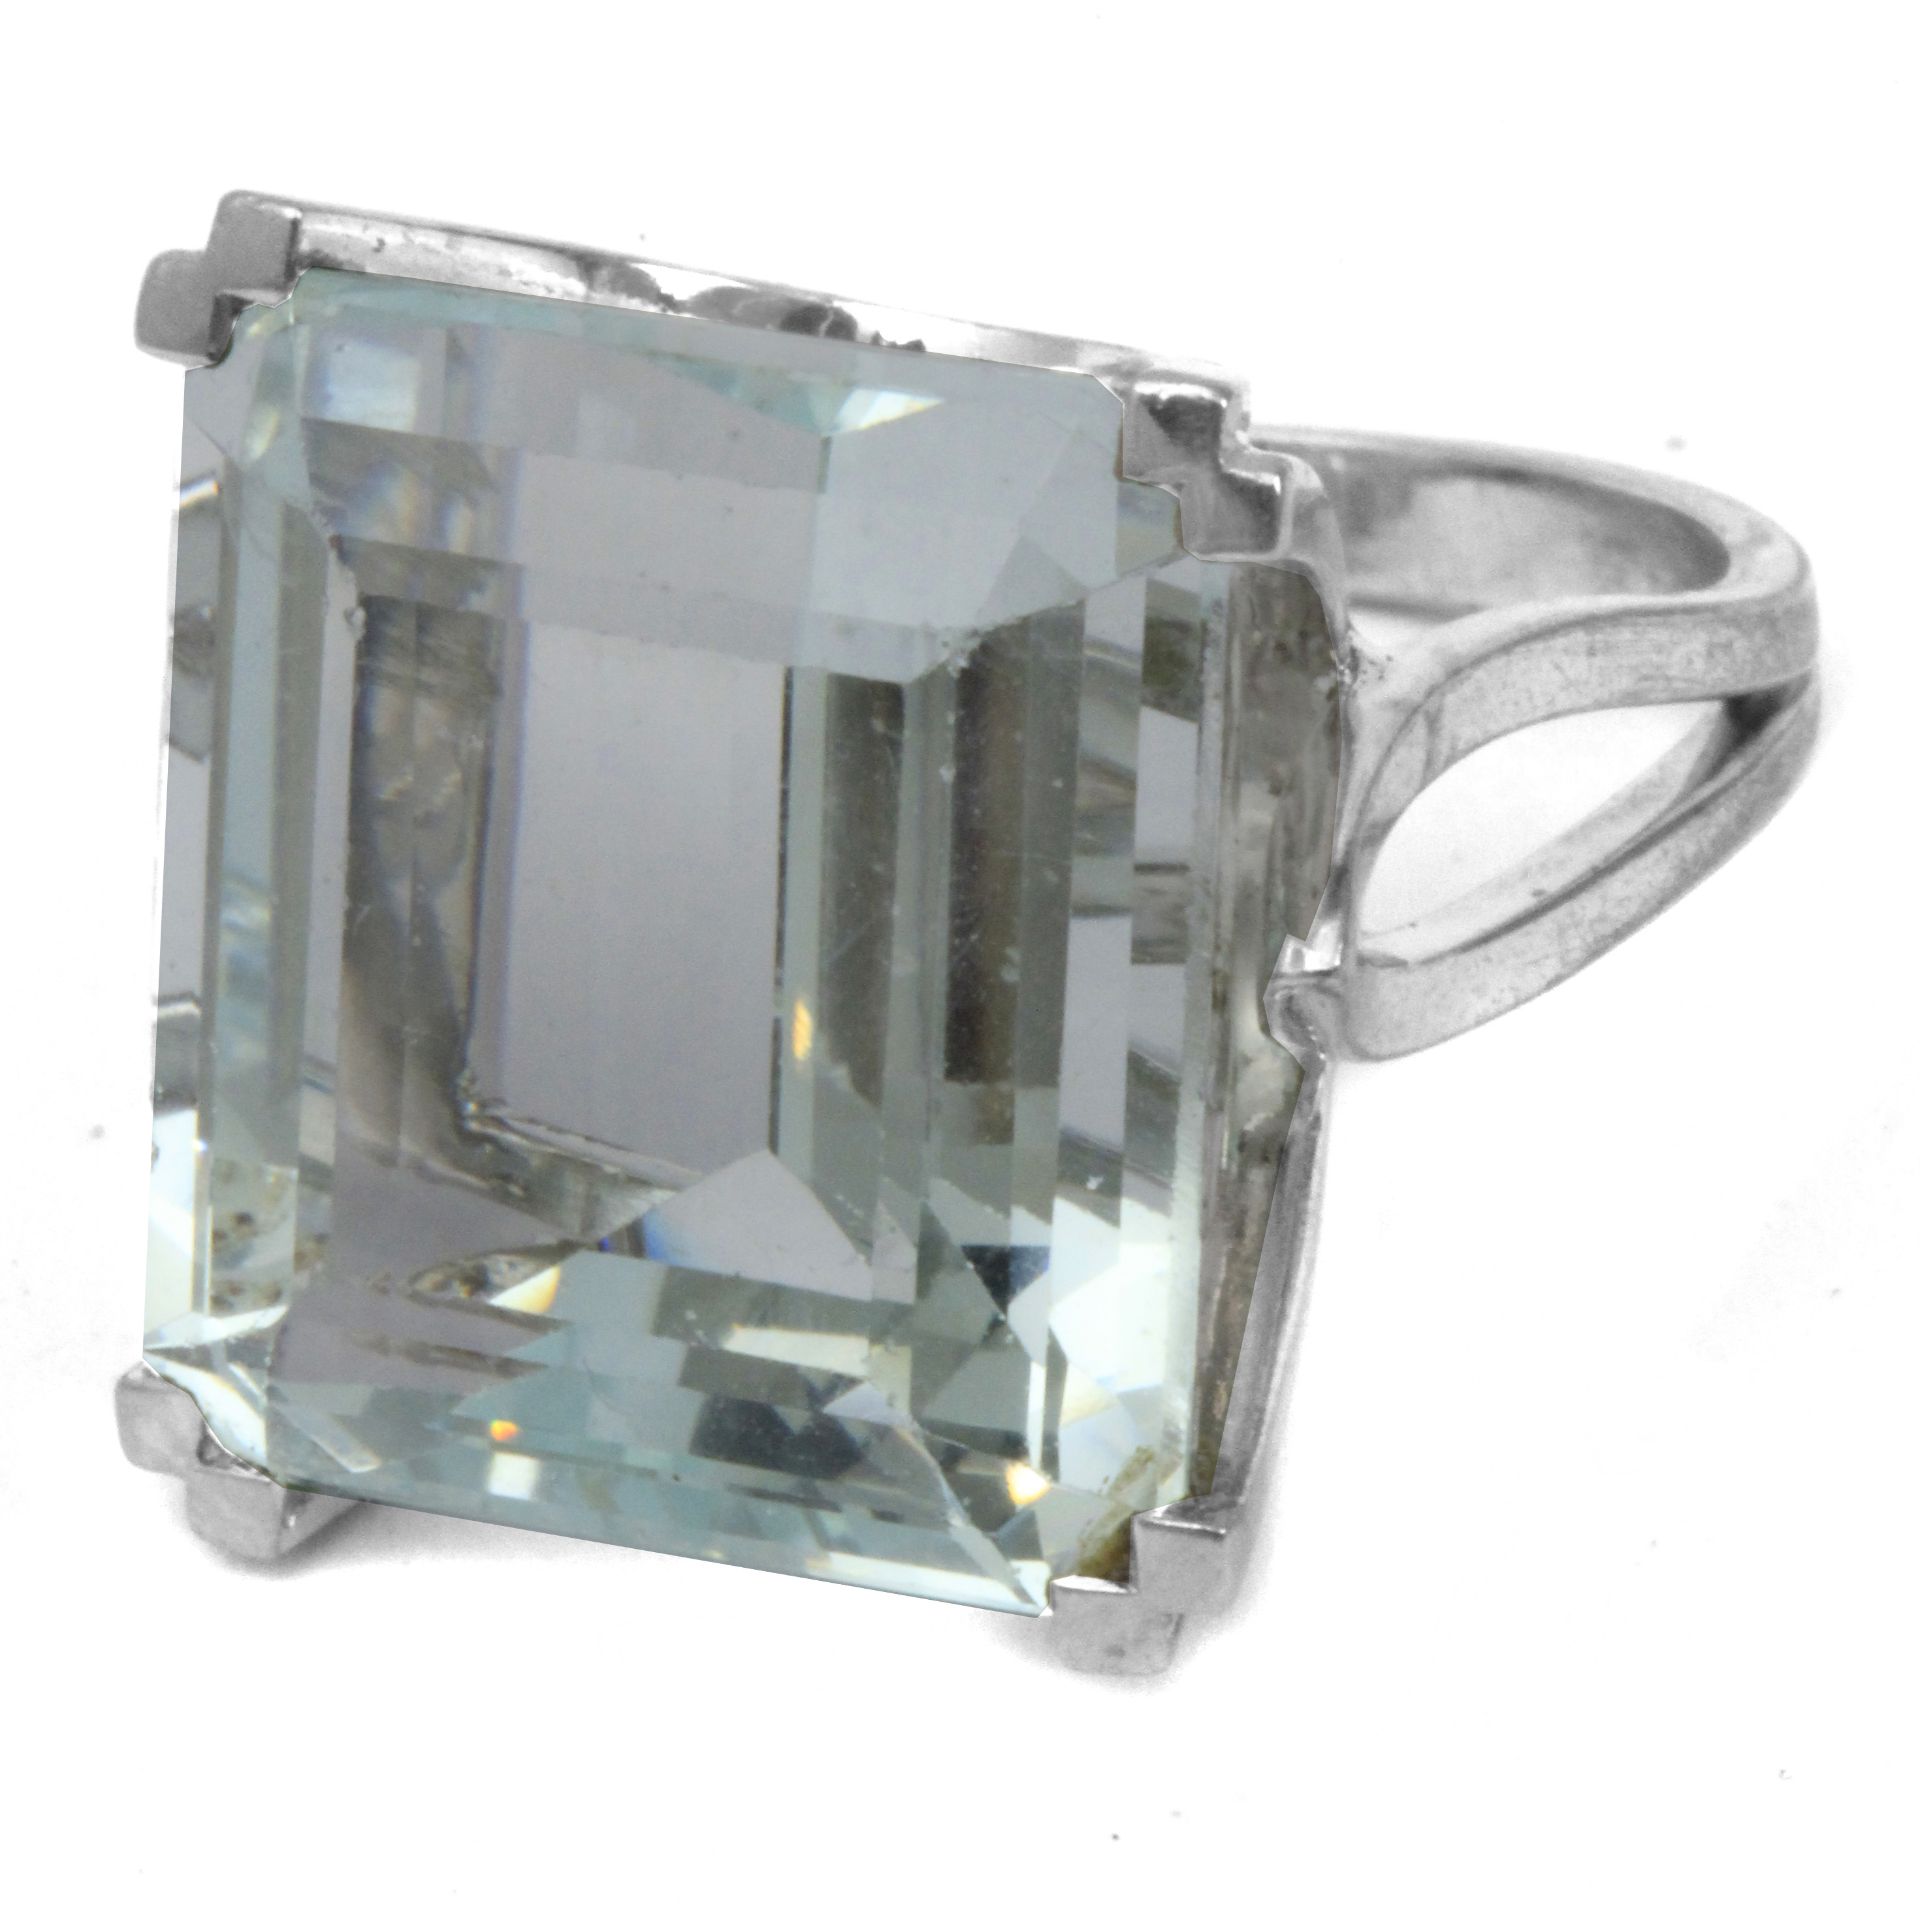 A 37 ct. emerald cut aquamarine ring with an 18k. white gold setting